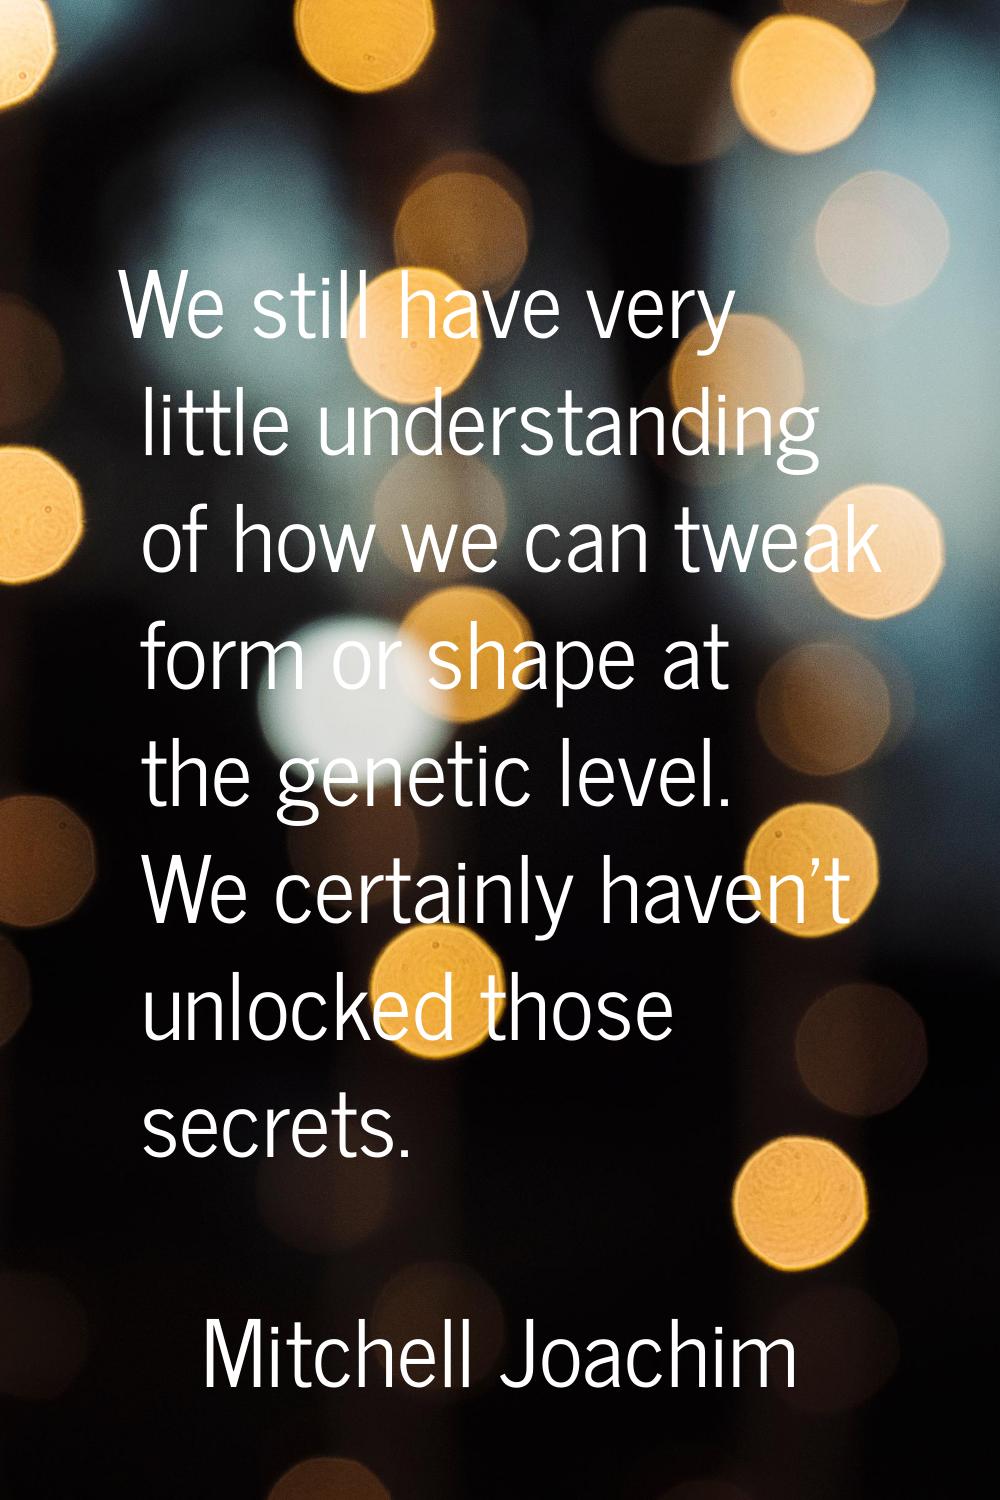 We still have very little understanding of how we can tweak form or shape at the genetic level. We 